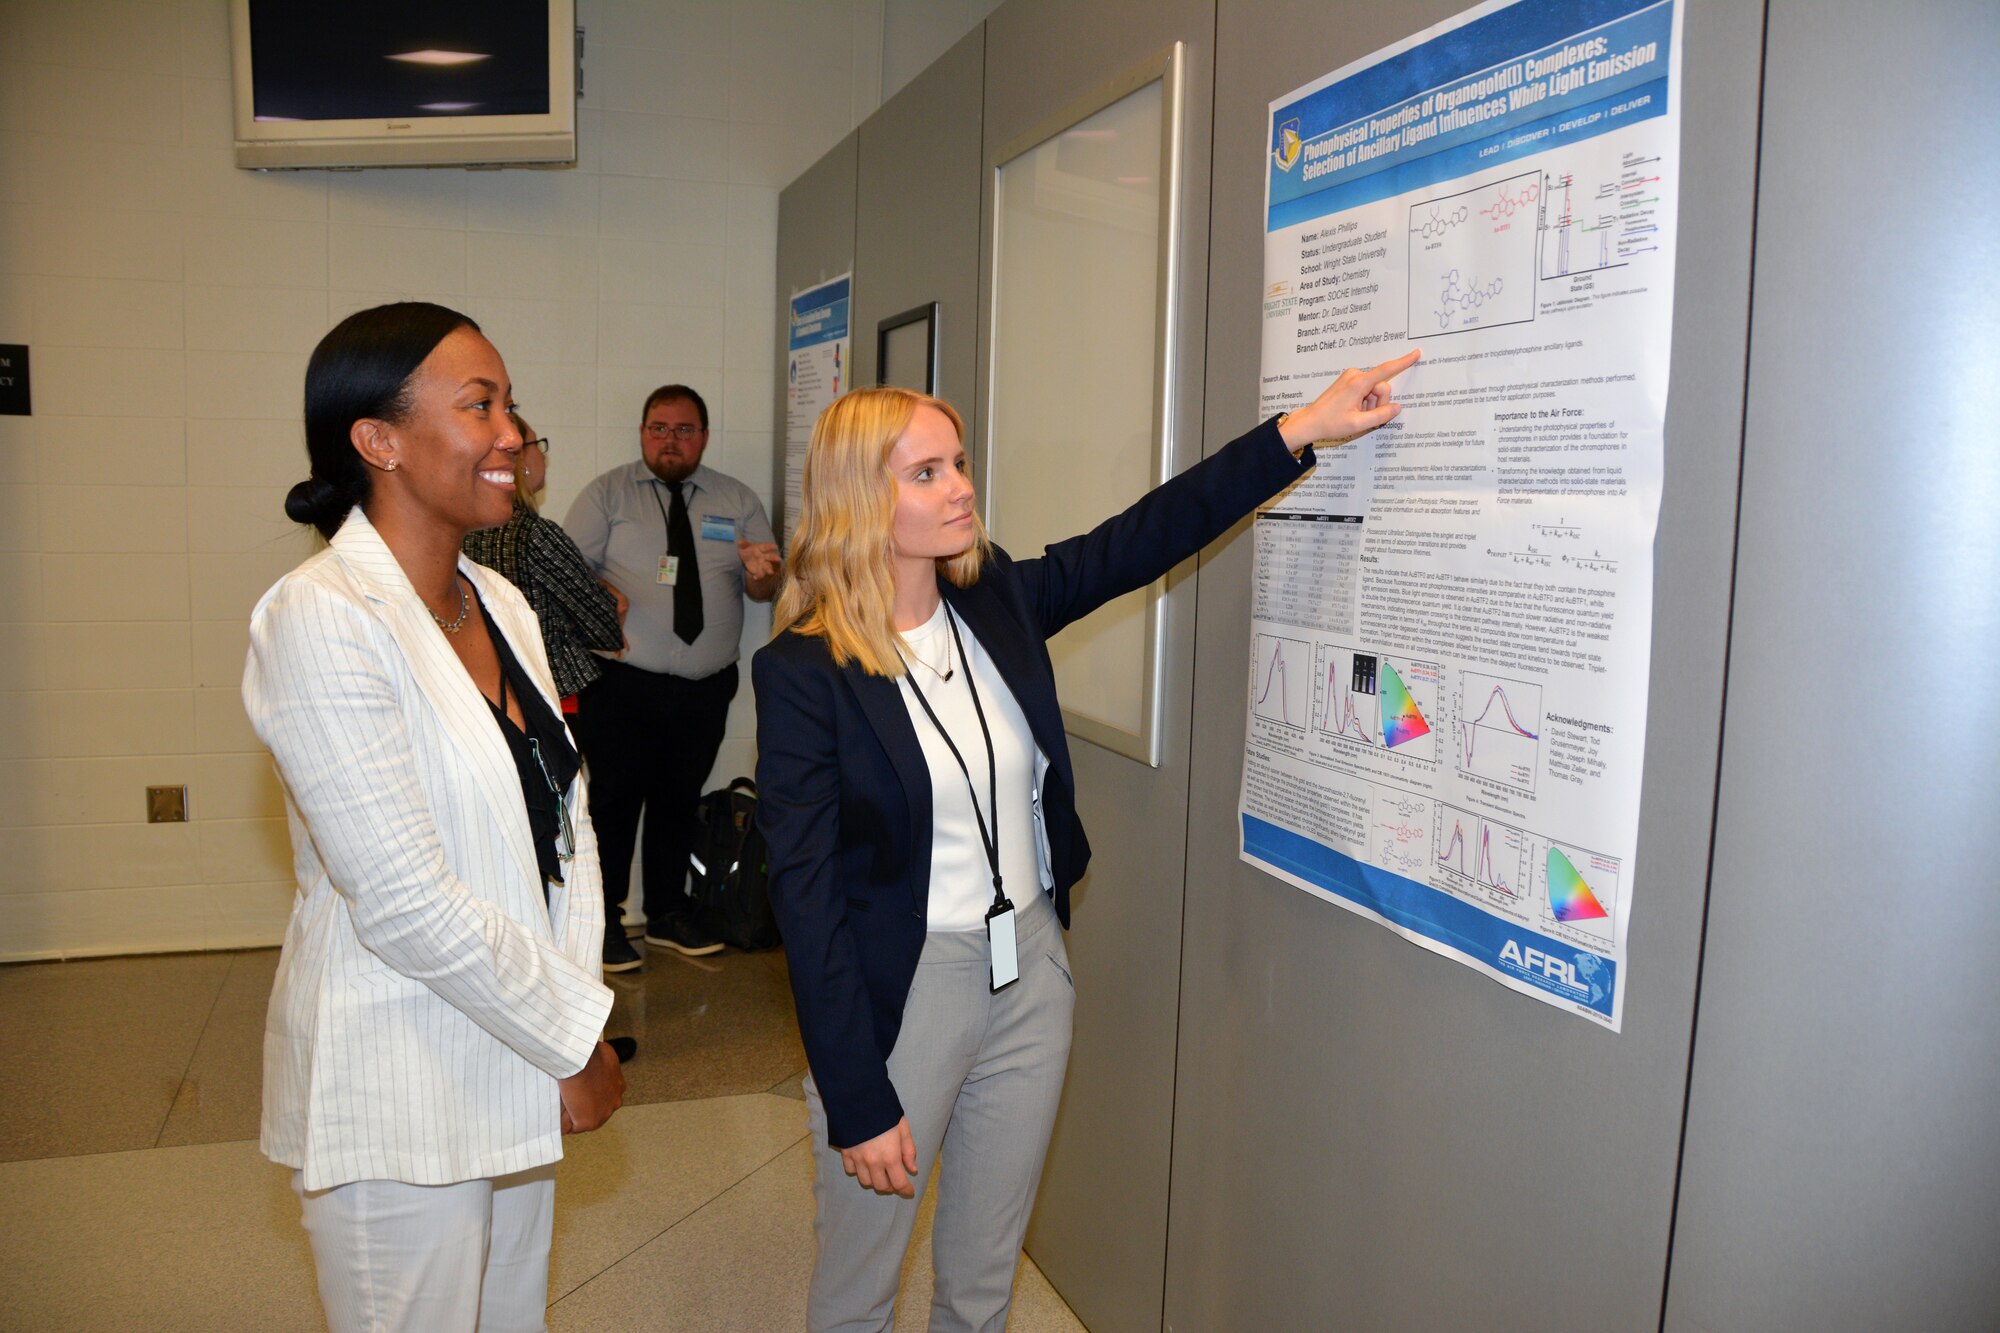 Alexis Phillips, an undergraduate student at Wright State University, presents her poster on Photophysical Properties of Organogold(I) Complexes: Selection of Ancillary Ligand Influences White Light Emission, to Asheley Blackford, who is in her fourth year of managing the student researcher poster session for AFRL’s Materials and Manufacturing Directorate. (U.S. Air Force photo/Spencer Deer)